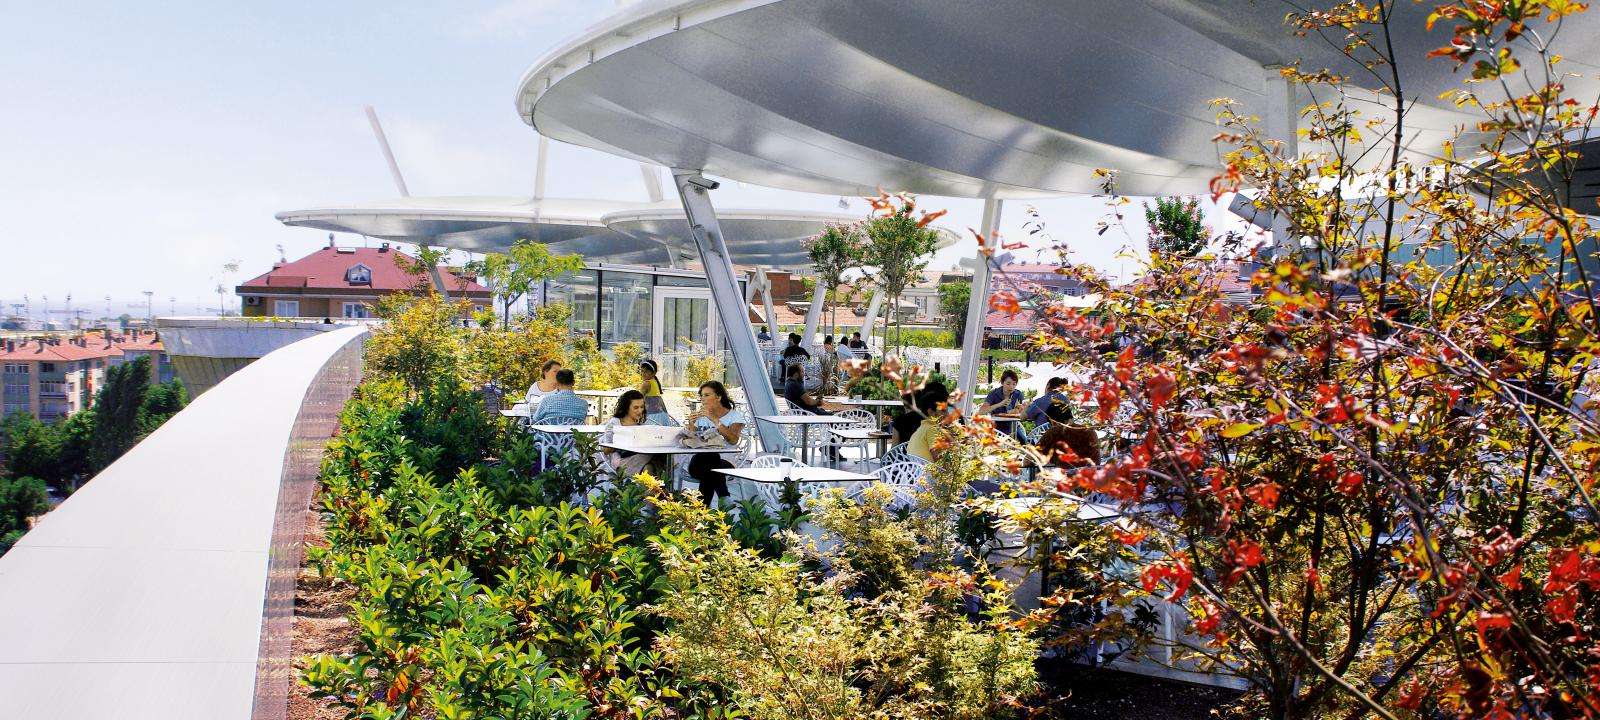 Roof garden with a cafe